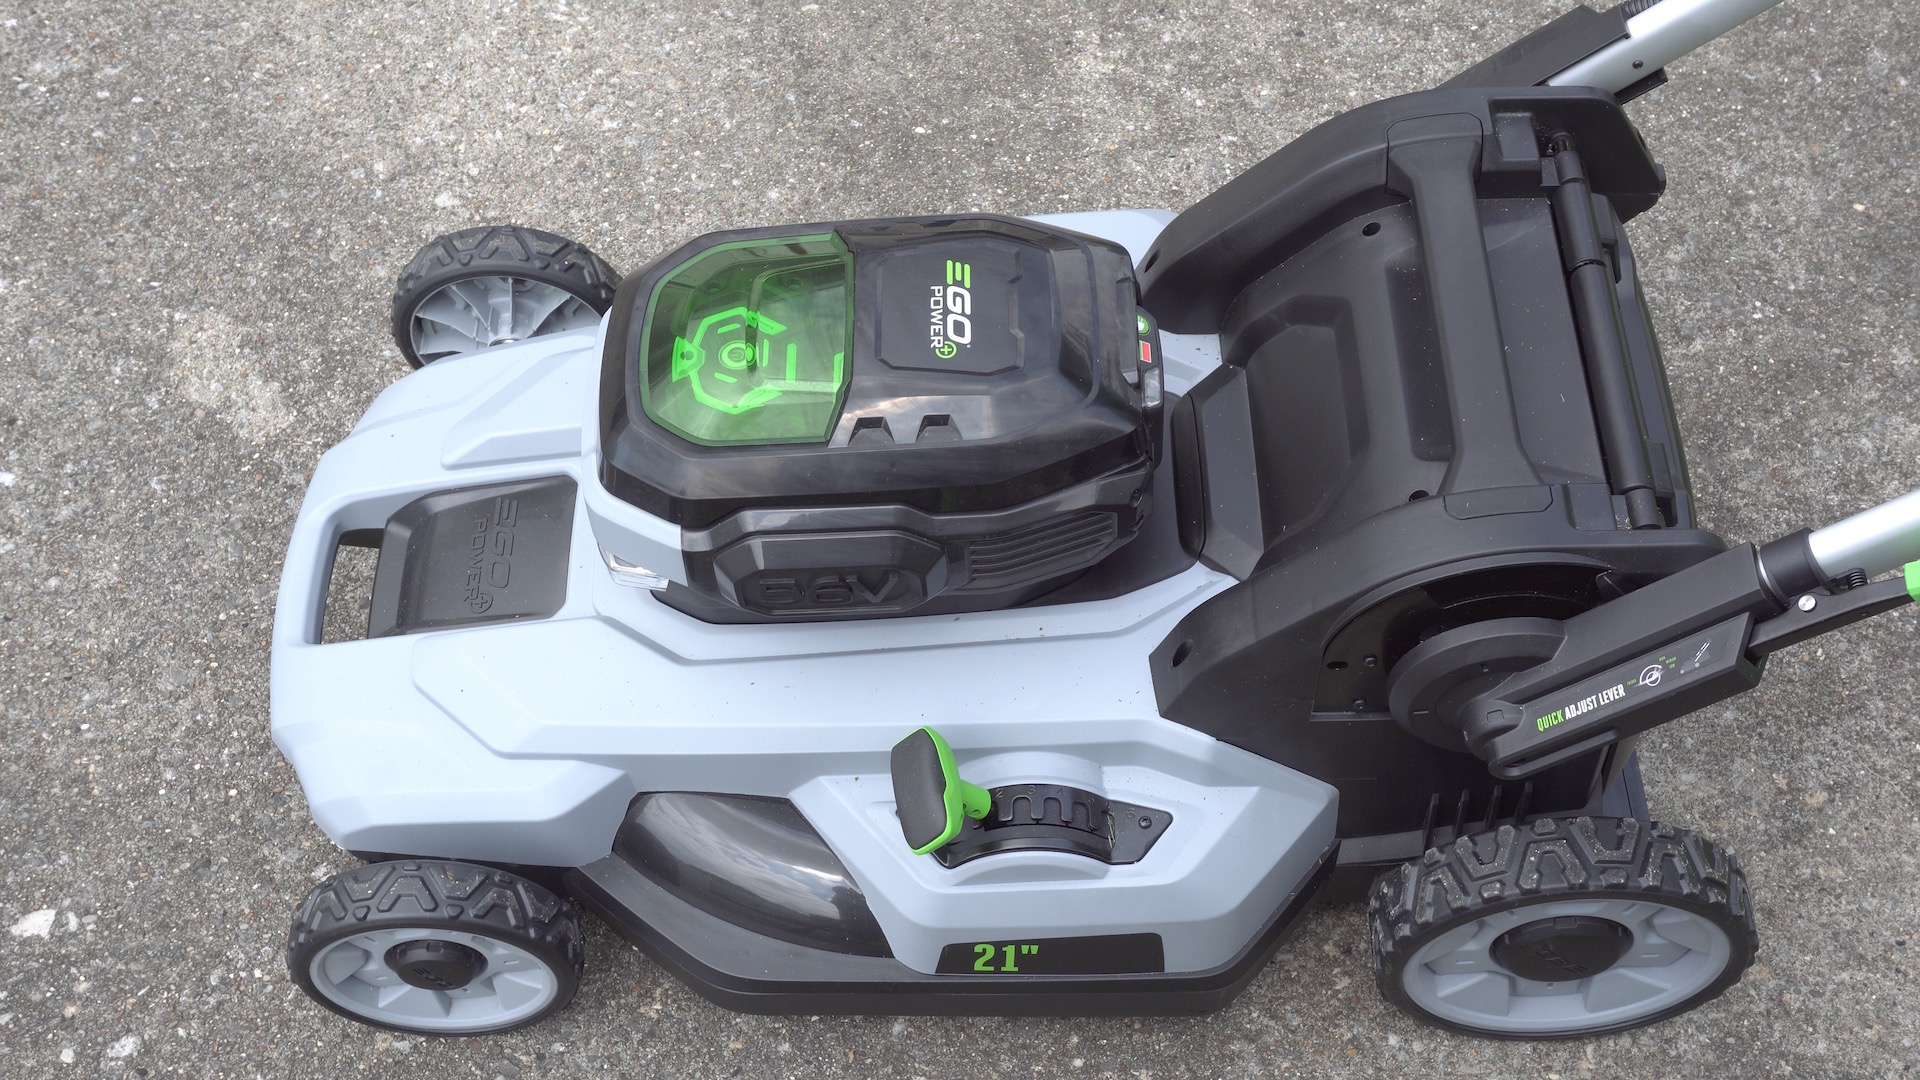 EGO Power Plus Lawn mower review